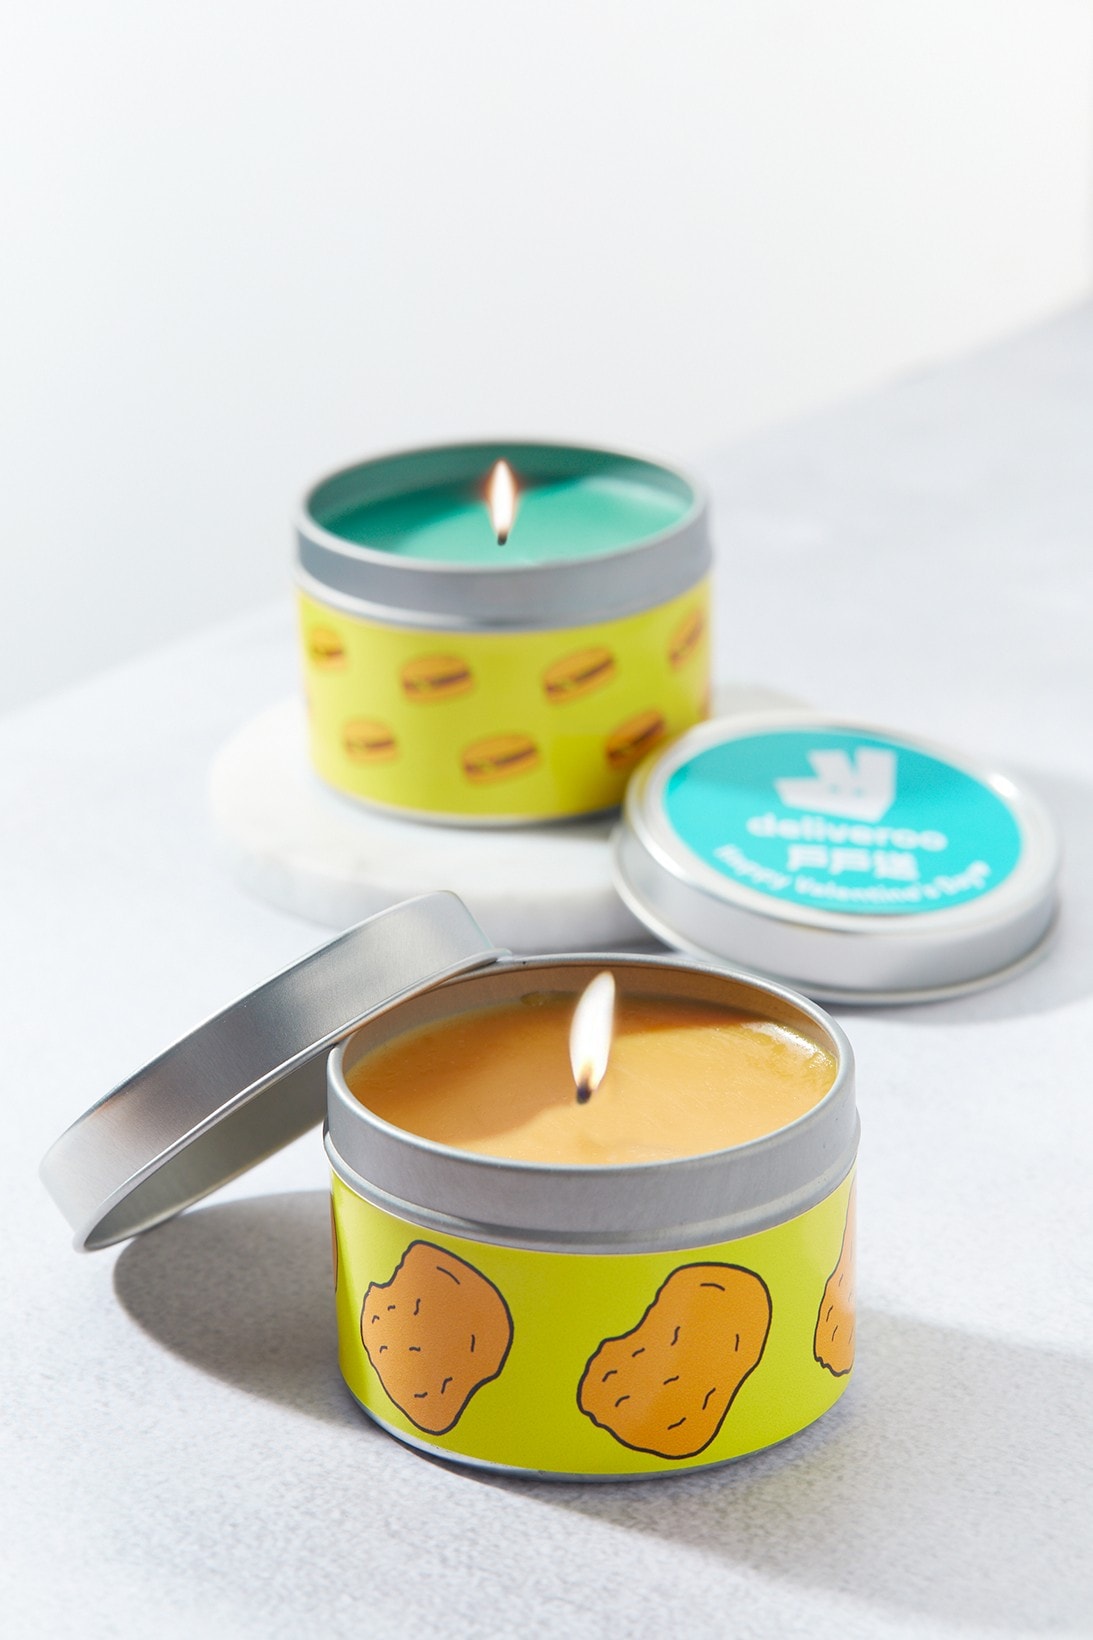 Deliveroo Food Scented Candles for Valentine's Day burgers chicken nuggets noodles giveaway free design homeware decor